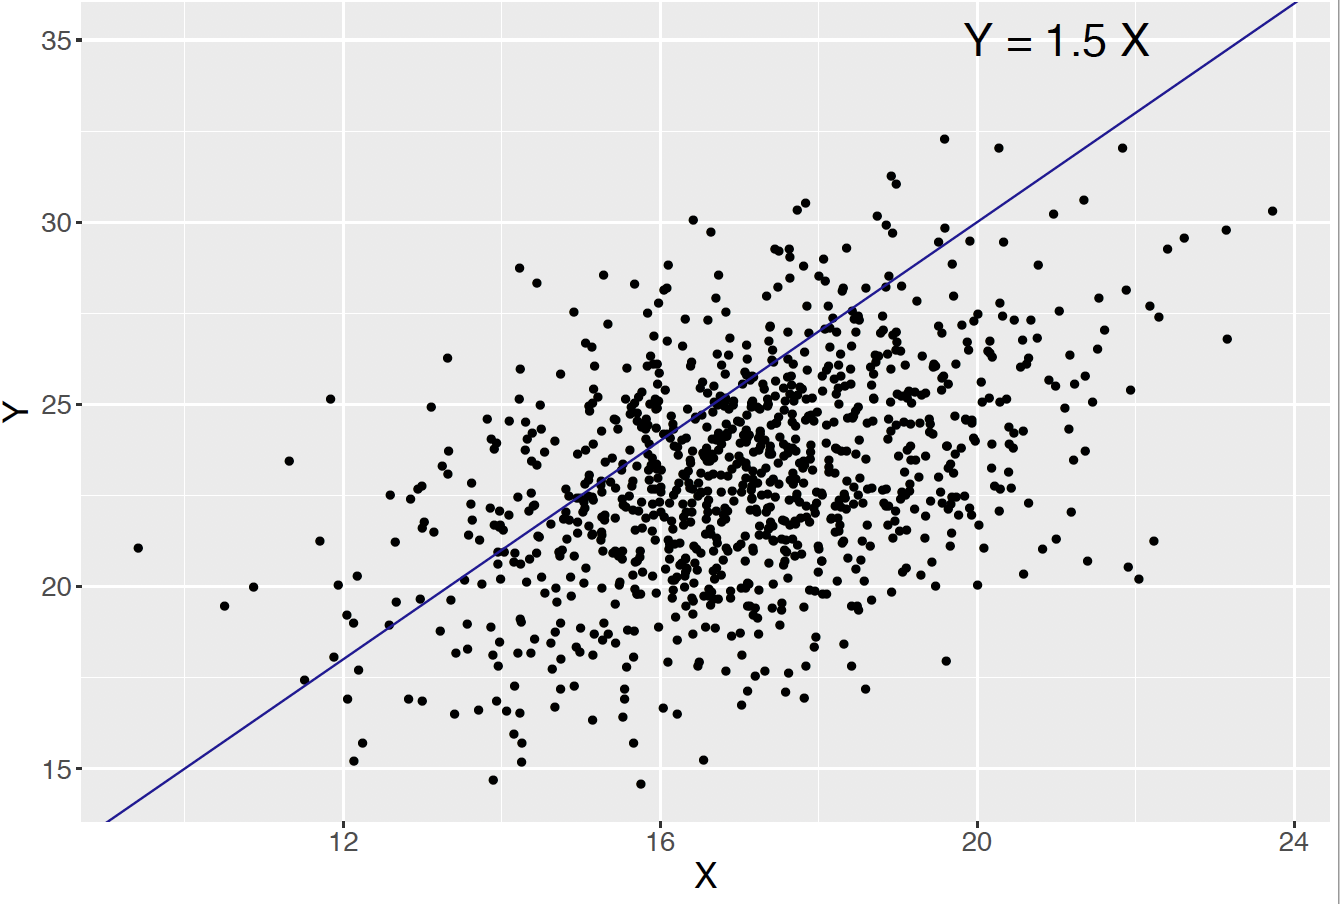 Scatterplot of simulated draws from the Bivariate Normal in body measurement example.  The probability that $Y > 1.5 X$ is approximated by the proportion of simulated points that fall to the left of the line $y = 1.5 x$.